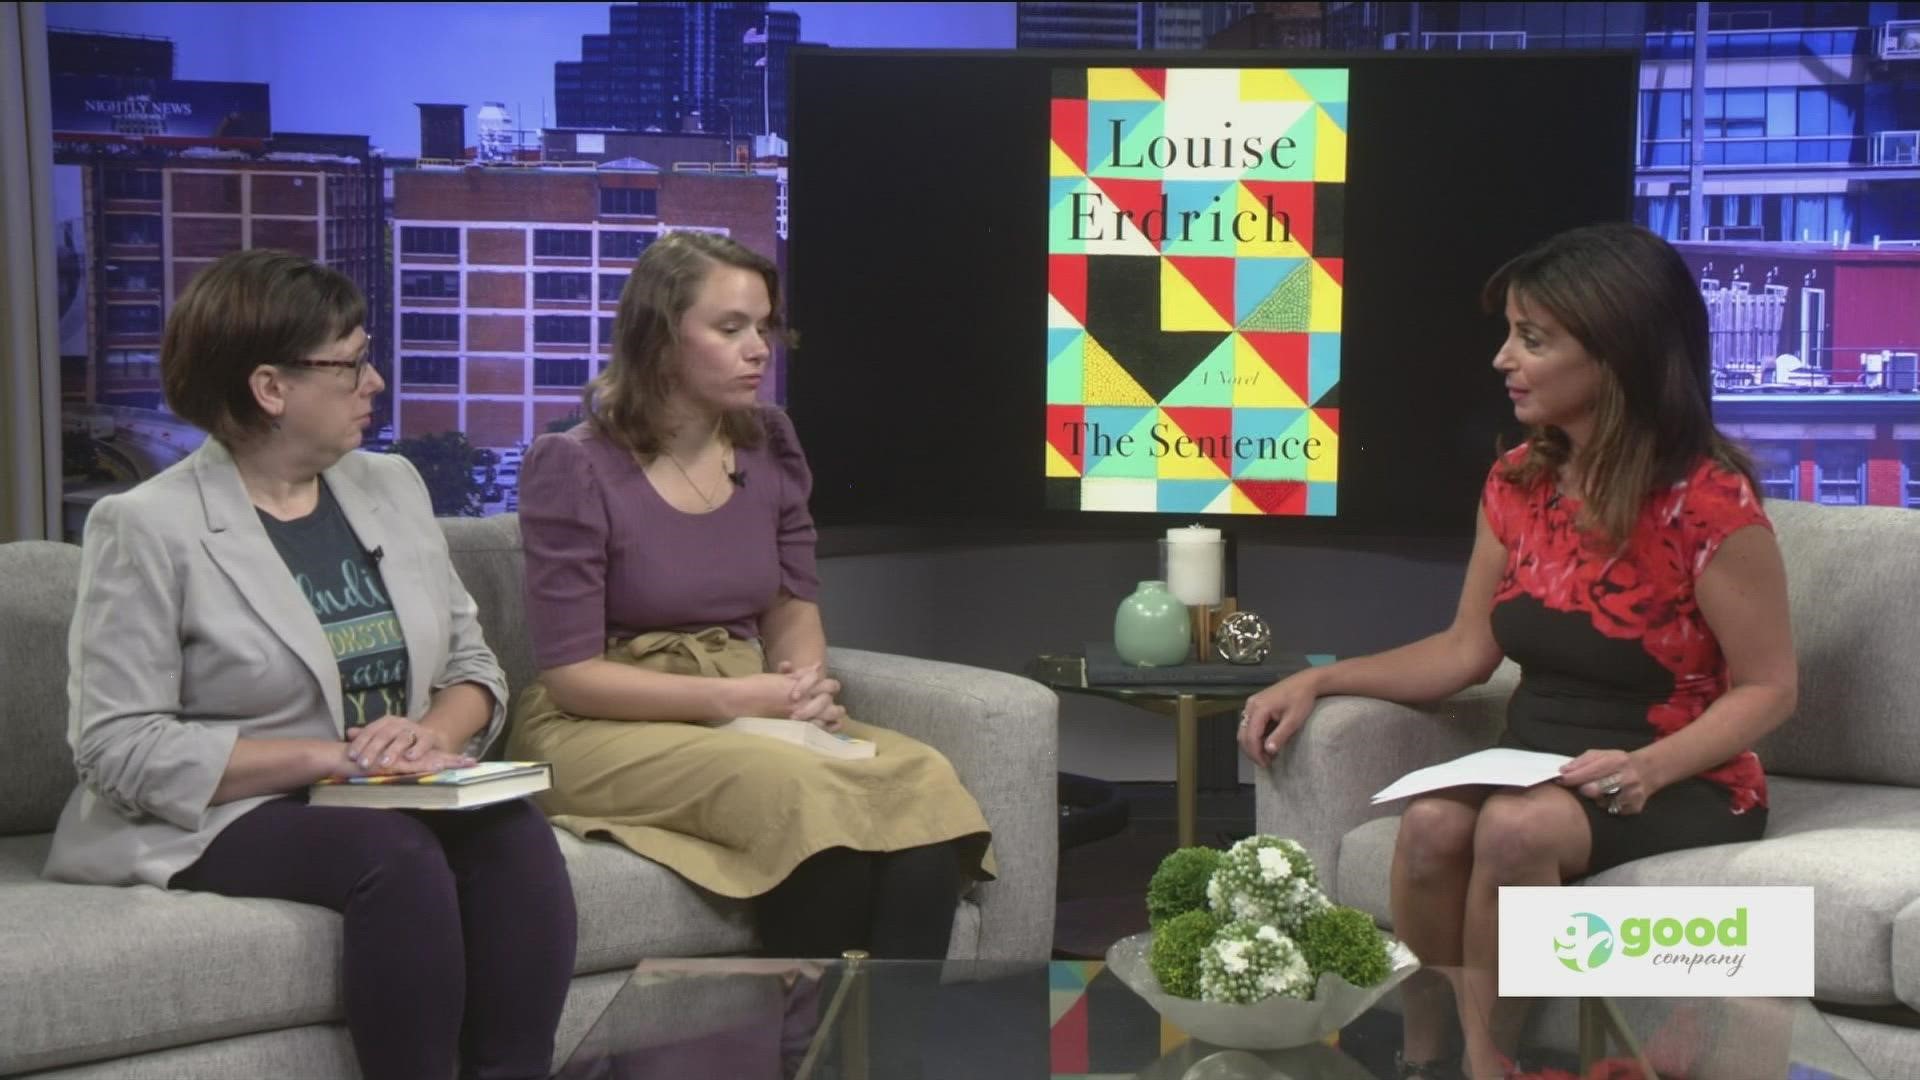 Elisabeth Plumlee-Watson & Toni K. Thayer from Loganberry Books speak with Hollie about October's Book Club pick "The Sentence".